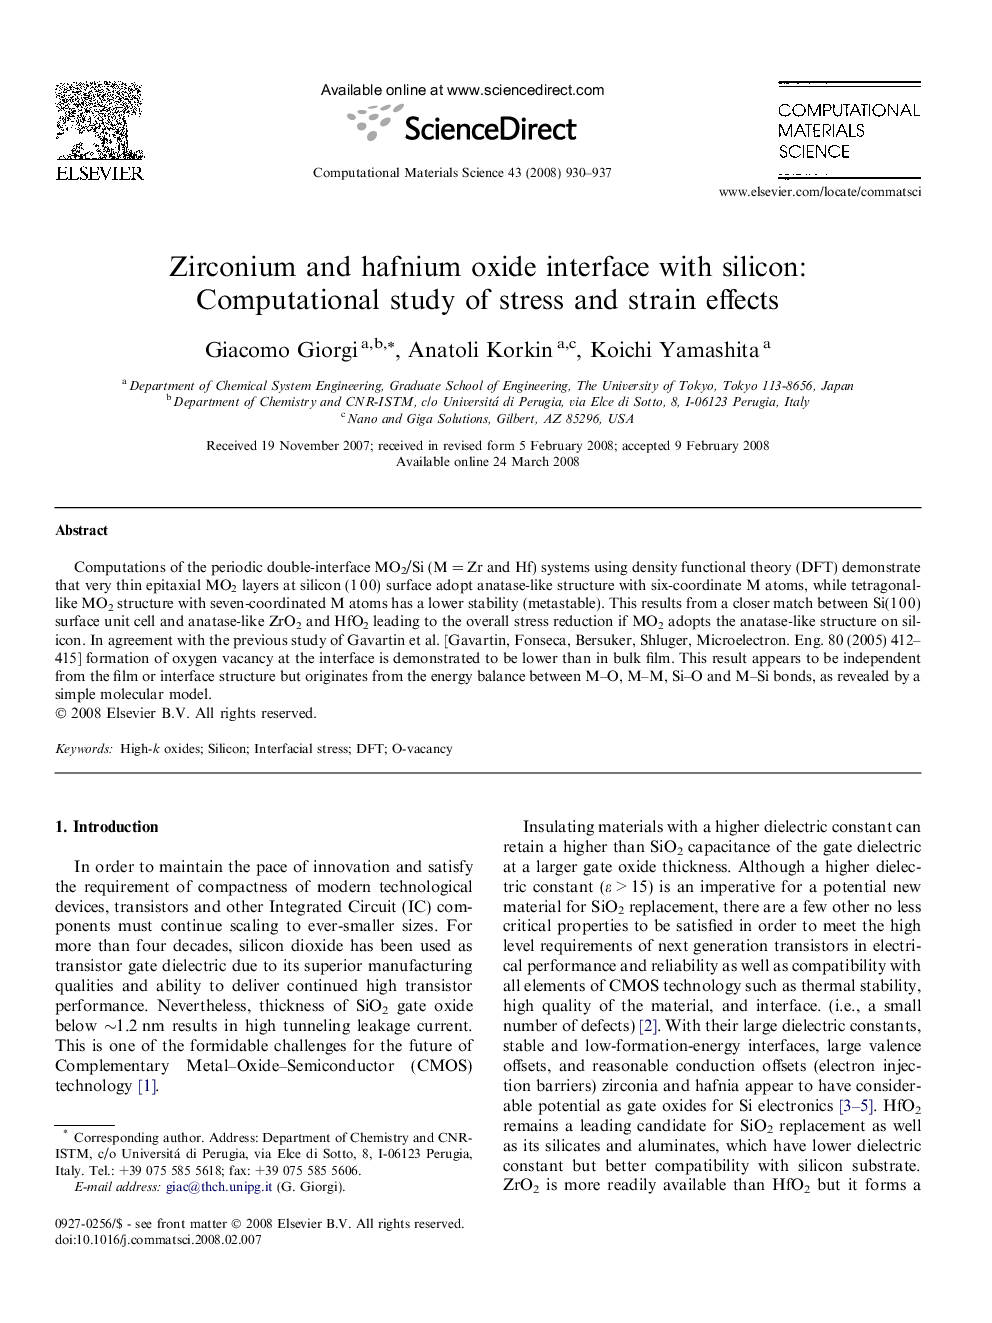 Zirconium and hafnium oxide interface with silicon: Computational study of stress and strain effects